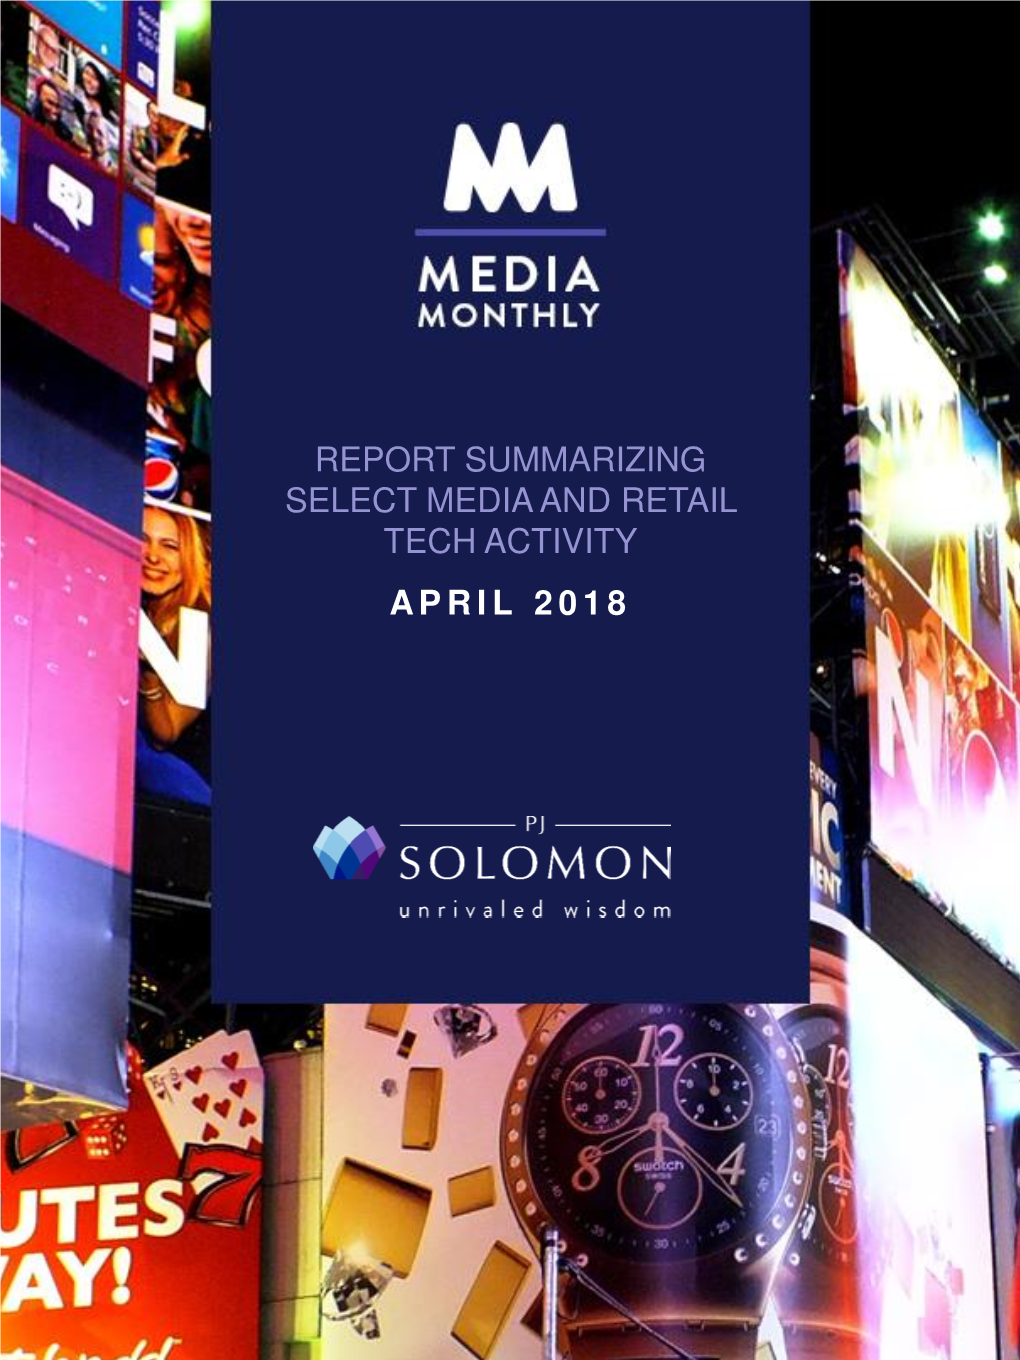 Report Summarizing Select Media and Retail Tech Activity a P R I L 2 0 1 8